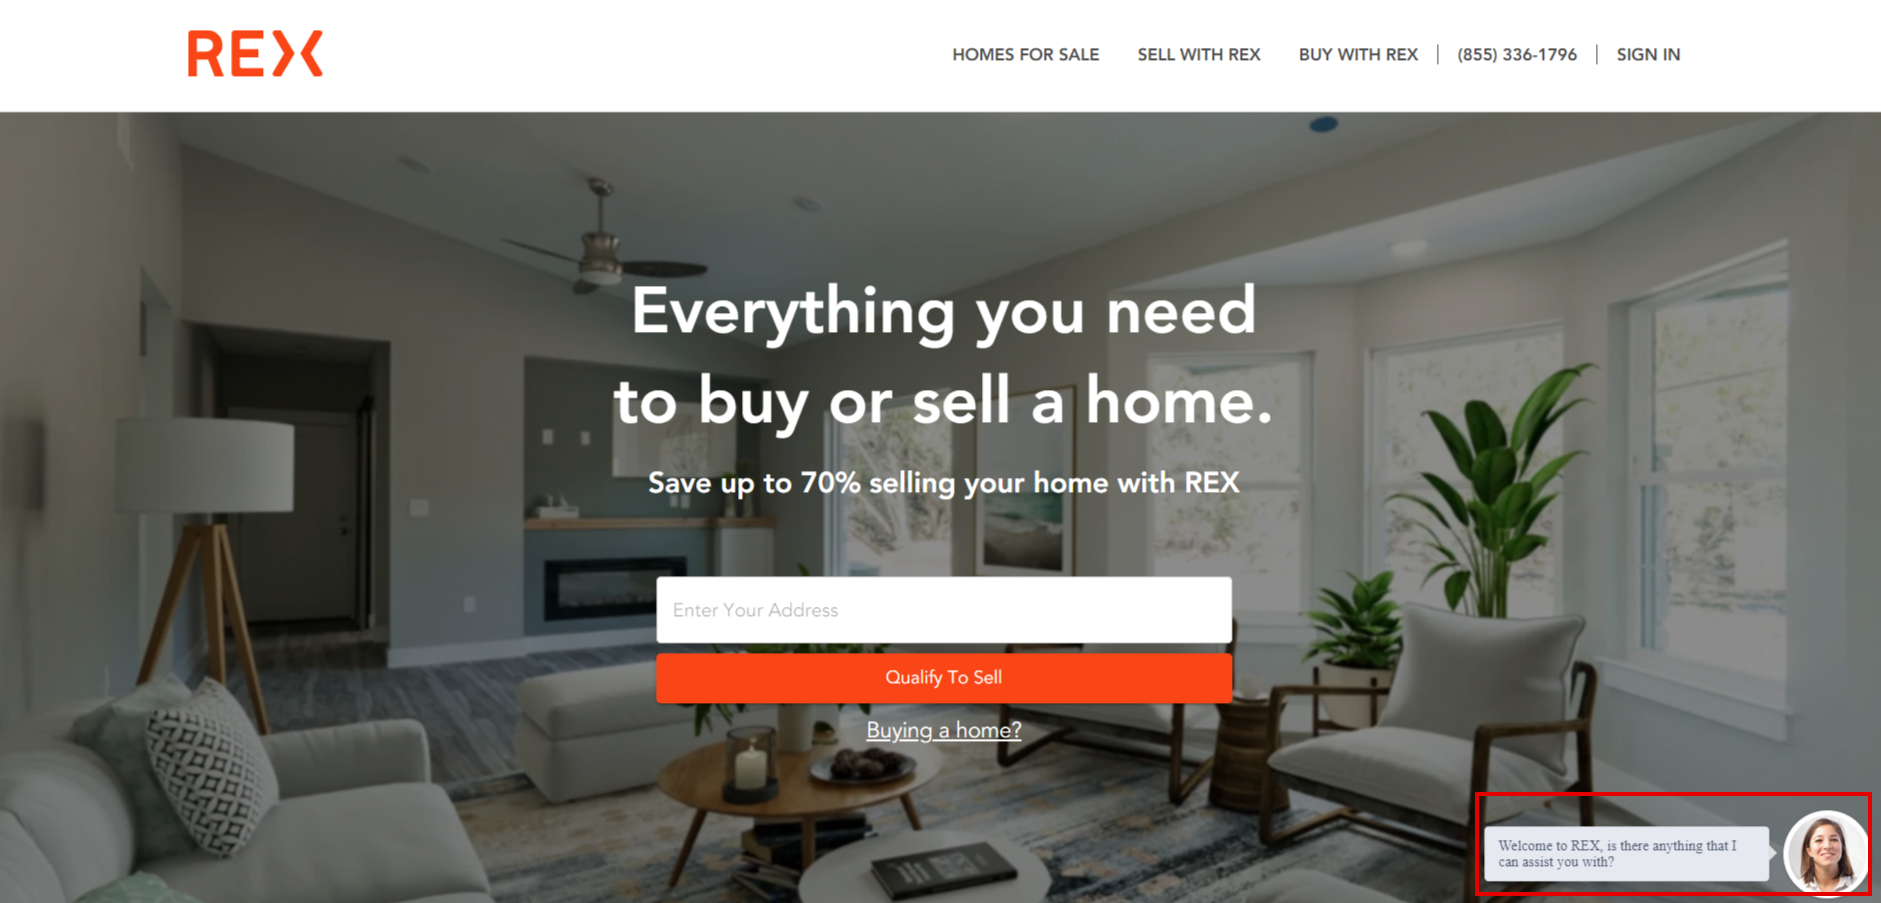 online chat on real estate landing page